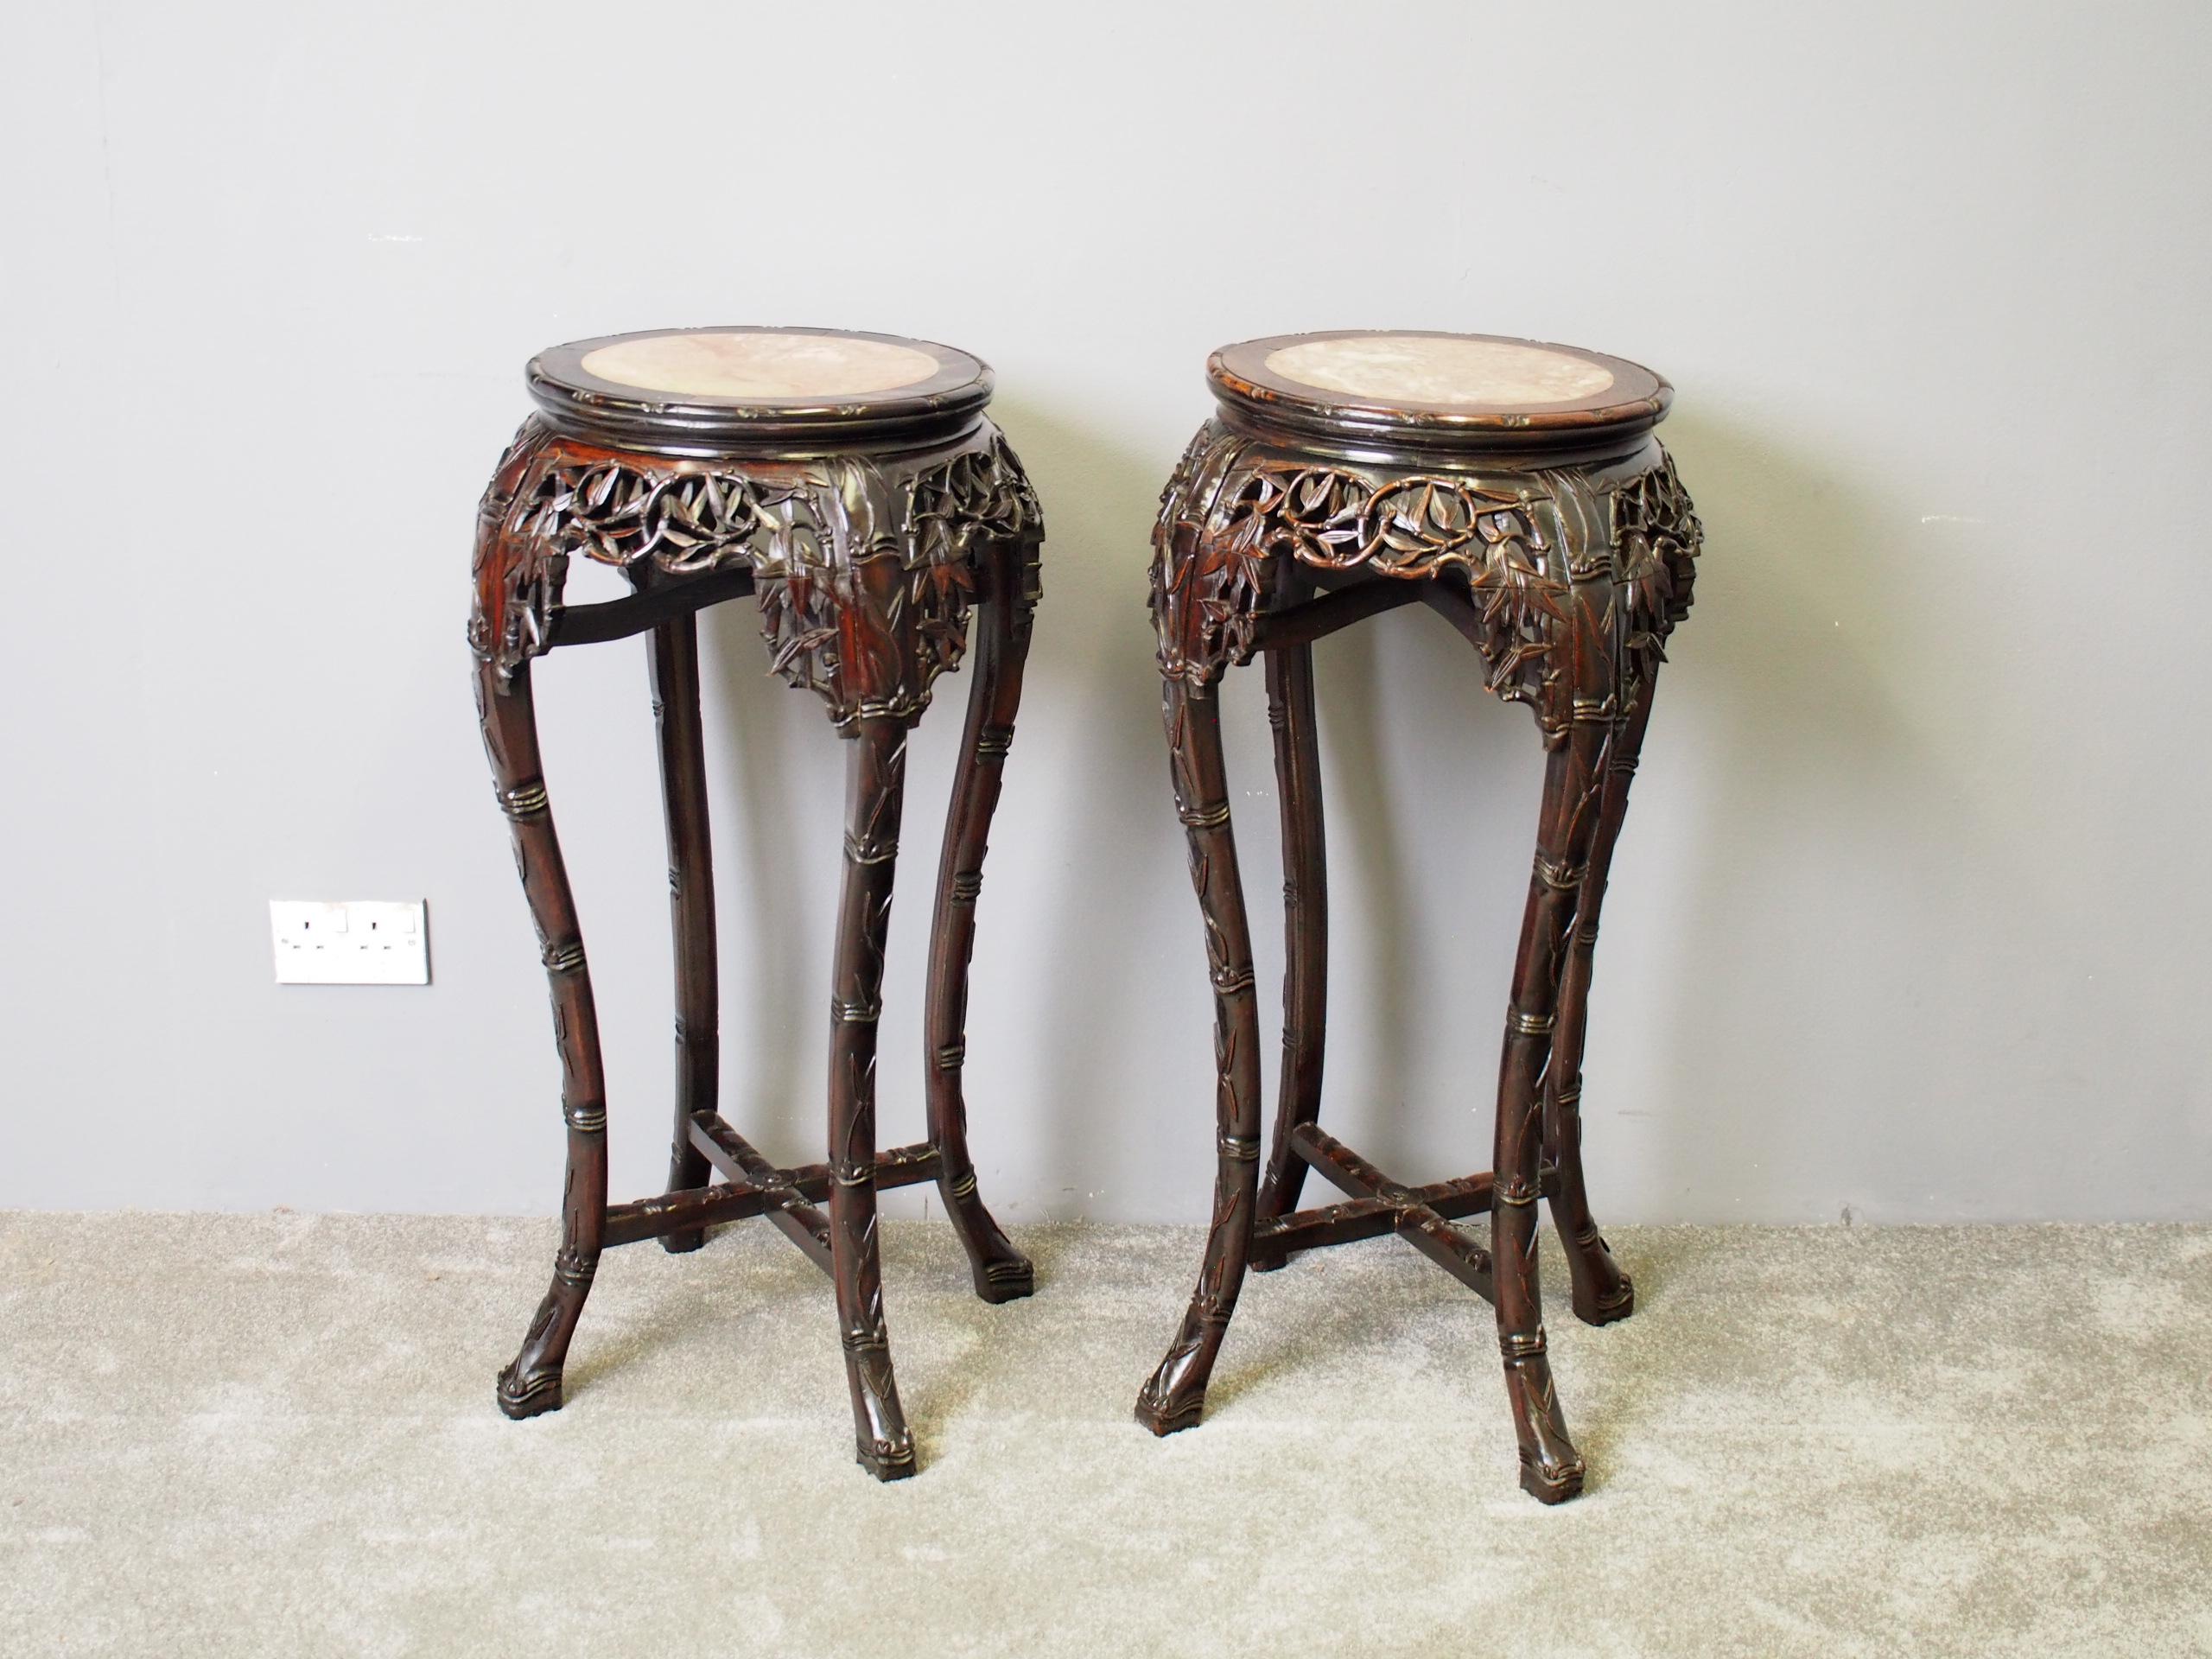 Rare pair of large Chinese rosewood plant stands, circa 1890. The circular tops with carved rims and variegated pink marble insets are over a convex, faux-bamboo carved, elaborate open fretwork frieze. This is supported on four foliate-carved